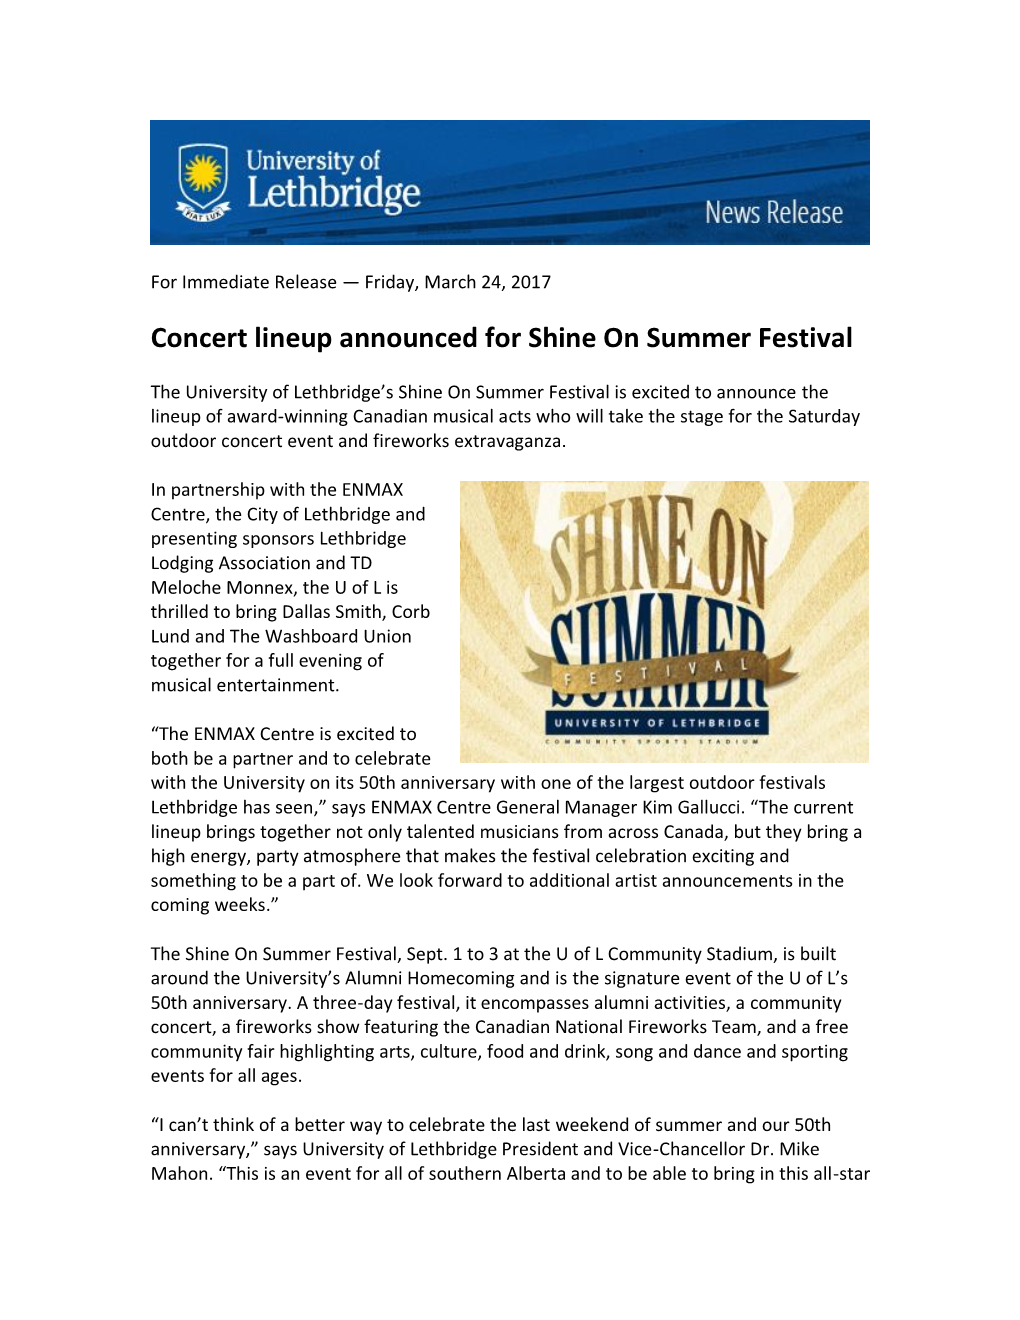 Concert Lineup Announced for Shine on Summer Festival